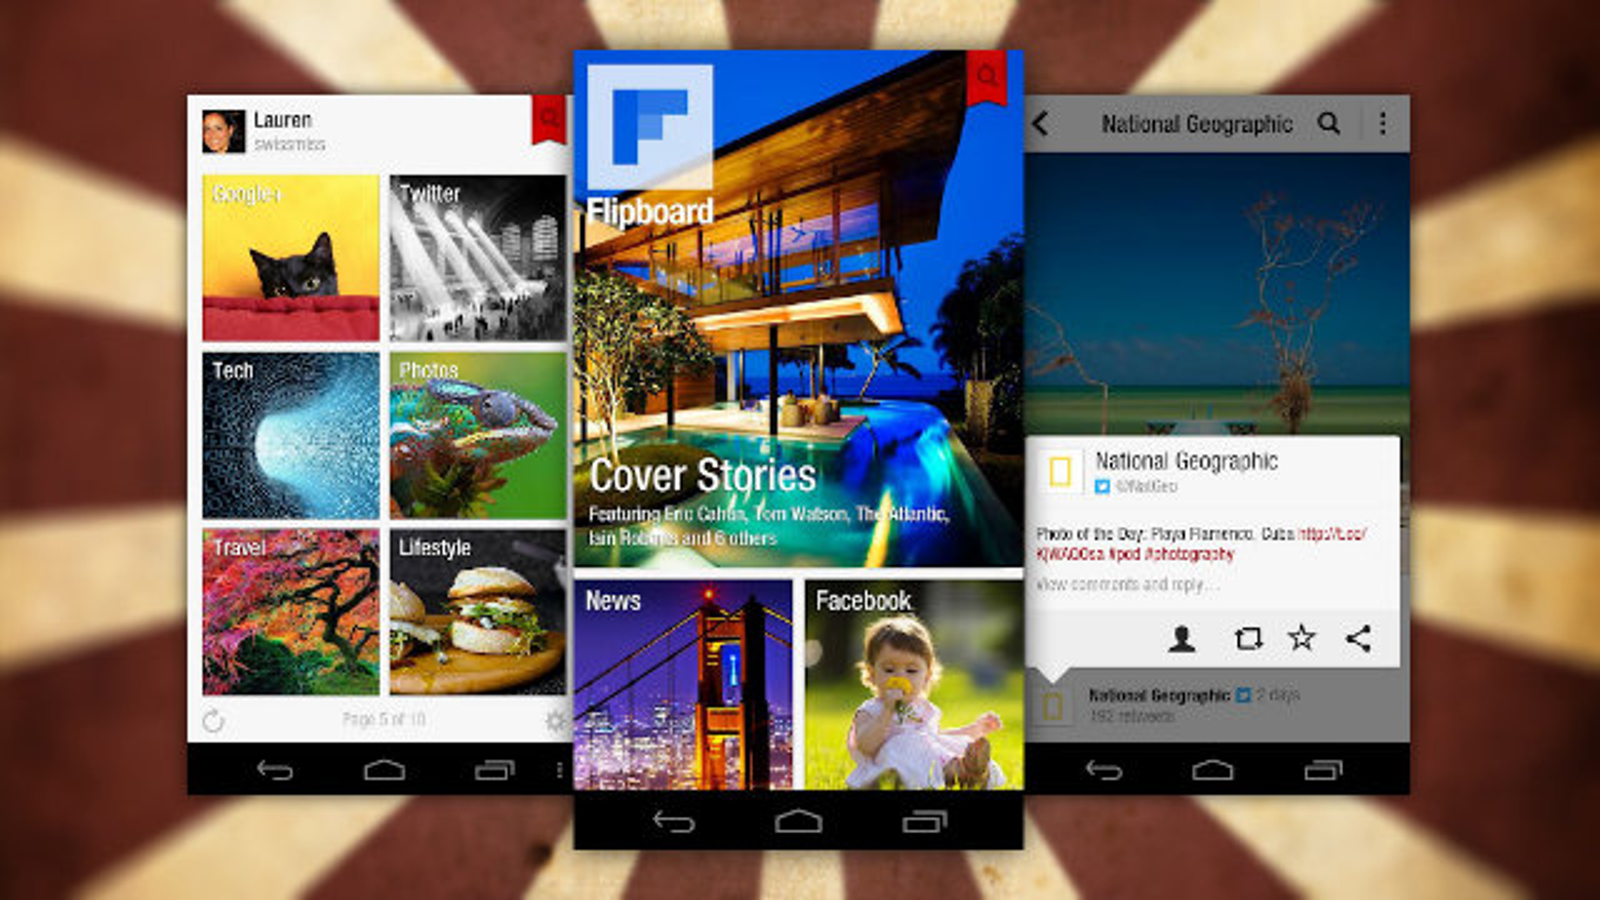 flipboard best news apps android